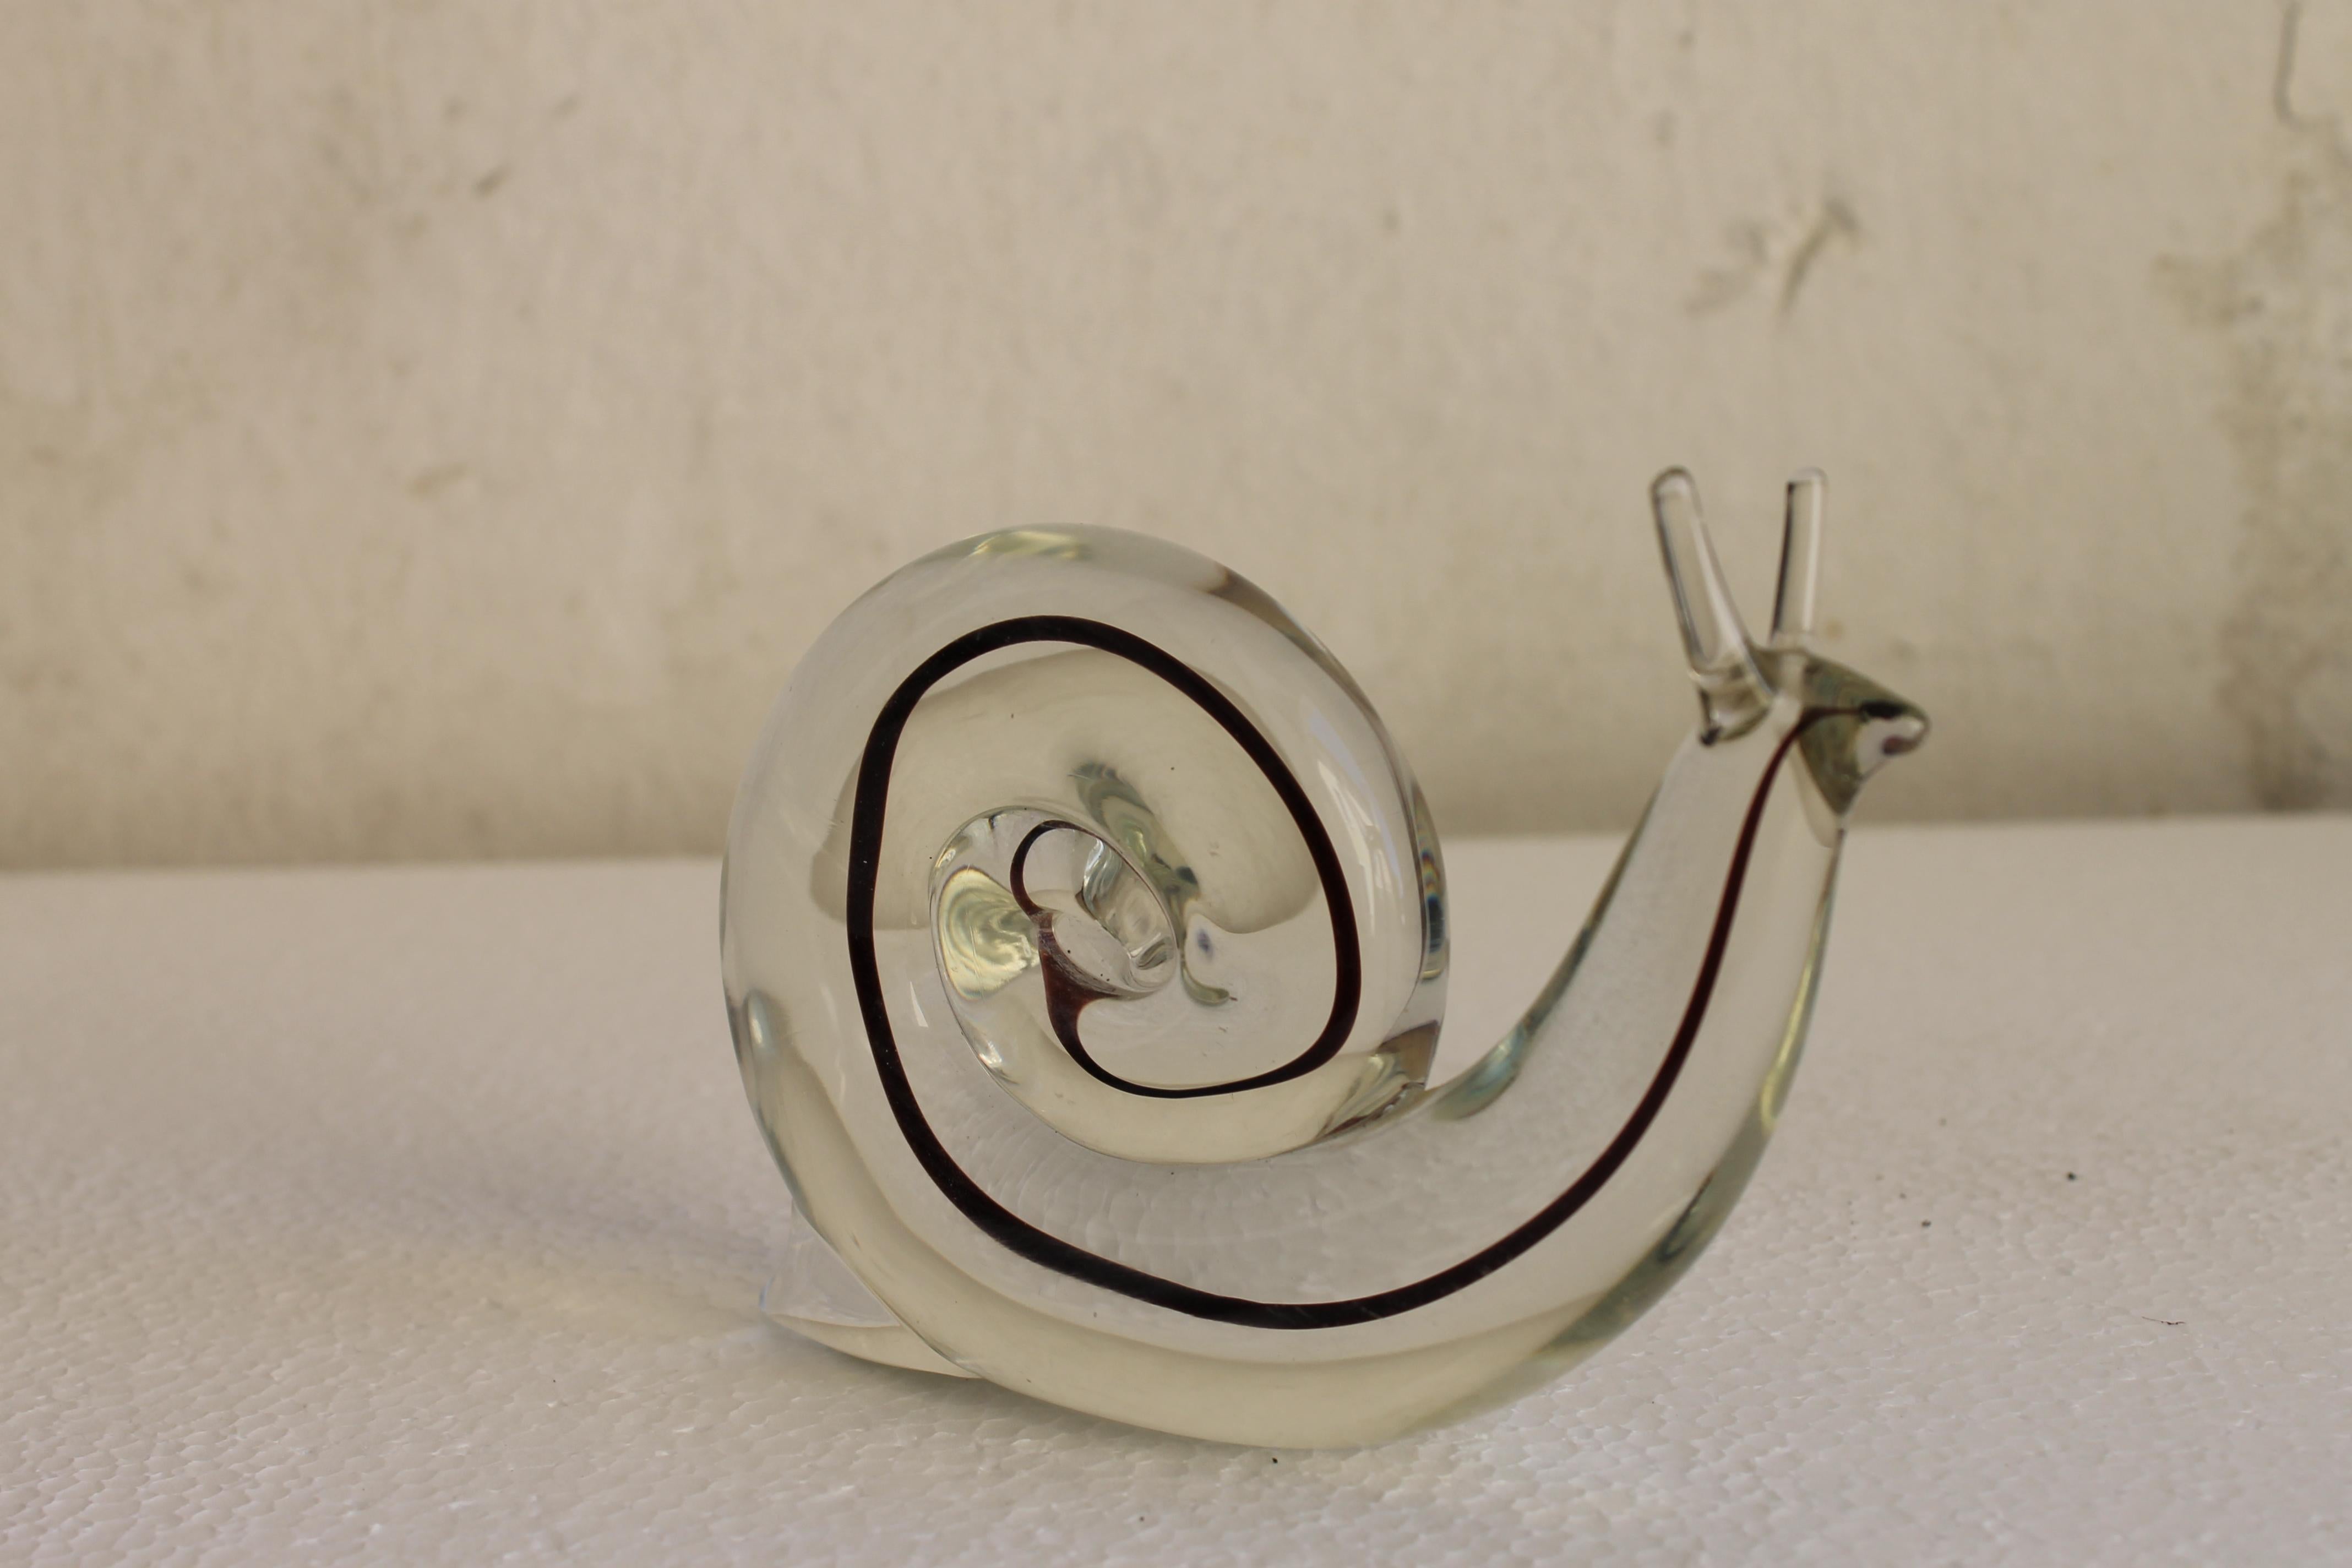 Mid Century CENEDESE Snail sculpture paperweight Sommerso Murano clear Glass, Italy '70s.

A beautiful piece made of thick clear Murano glass.This elegant snail has a black-purple filament running within. The light passing through this sculpture